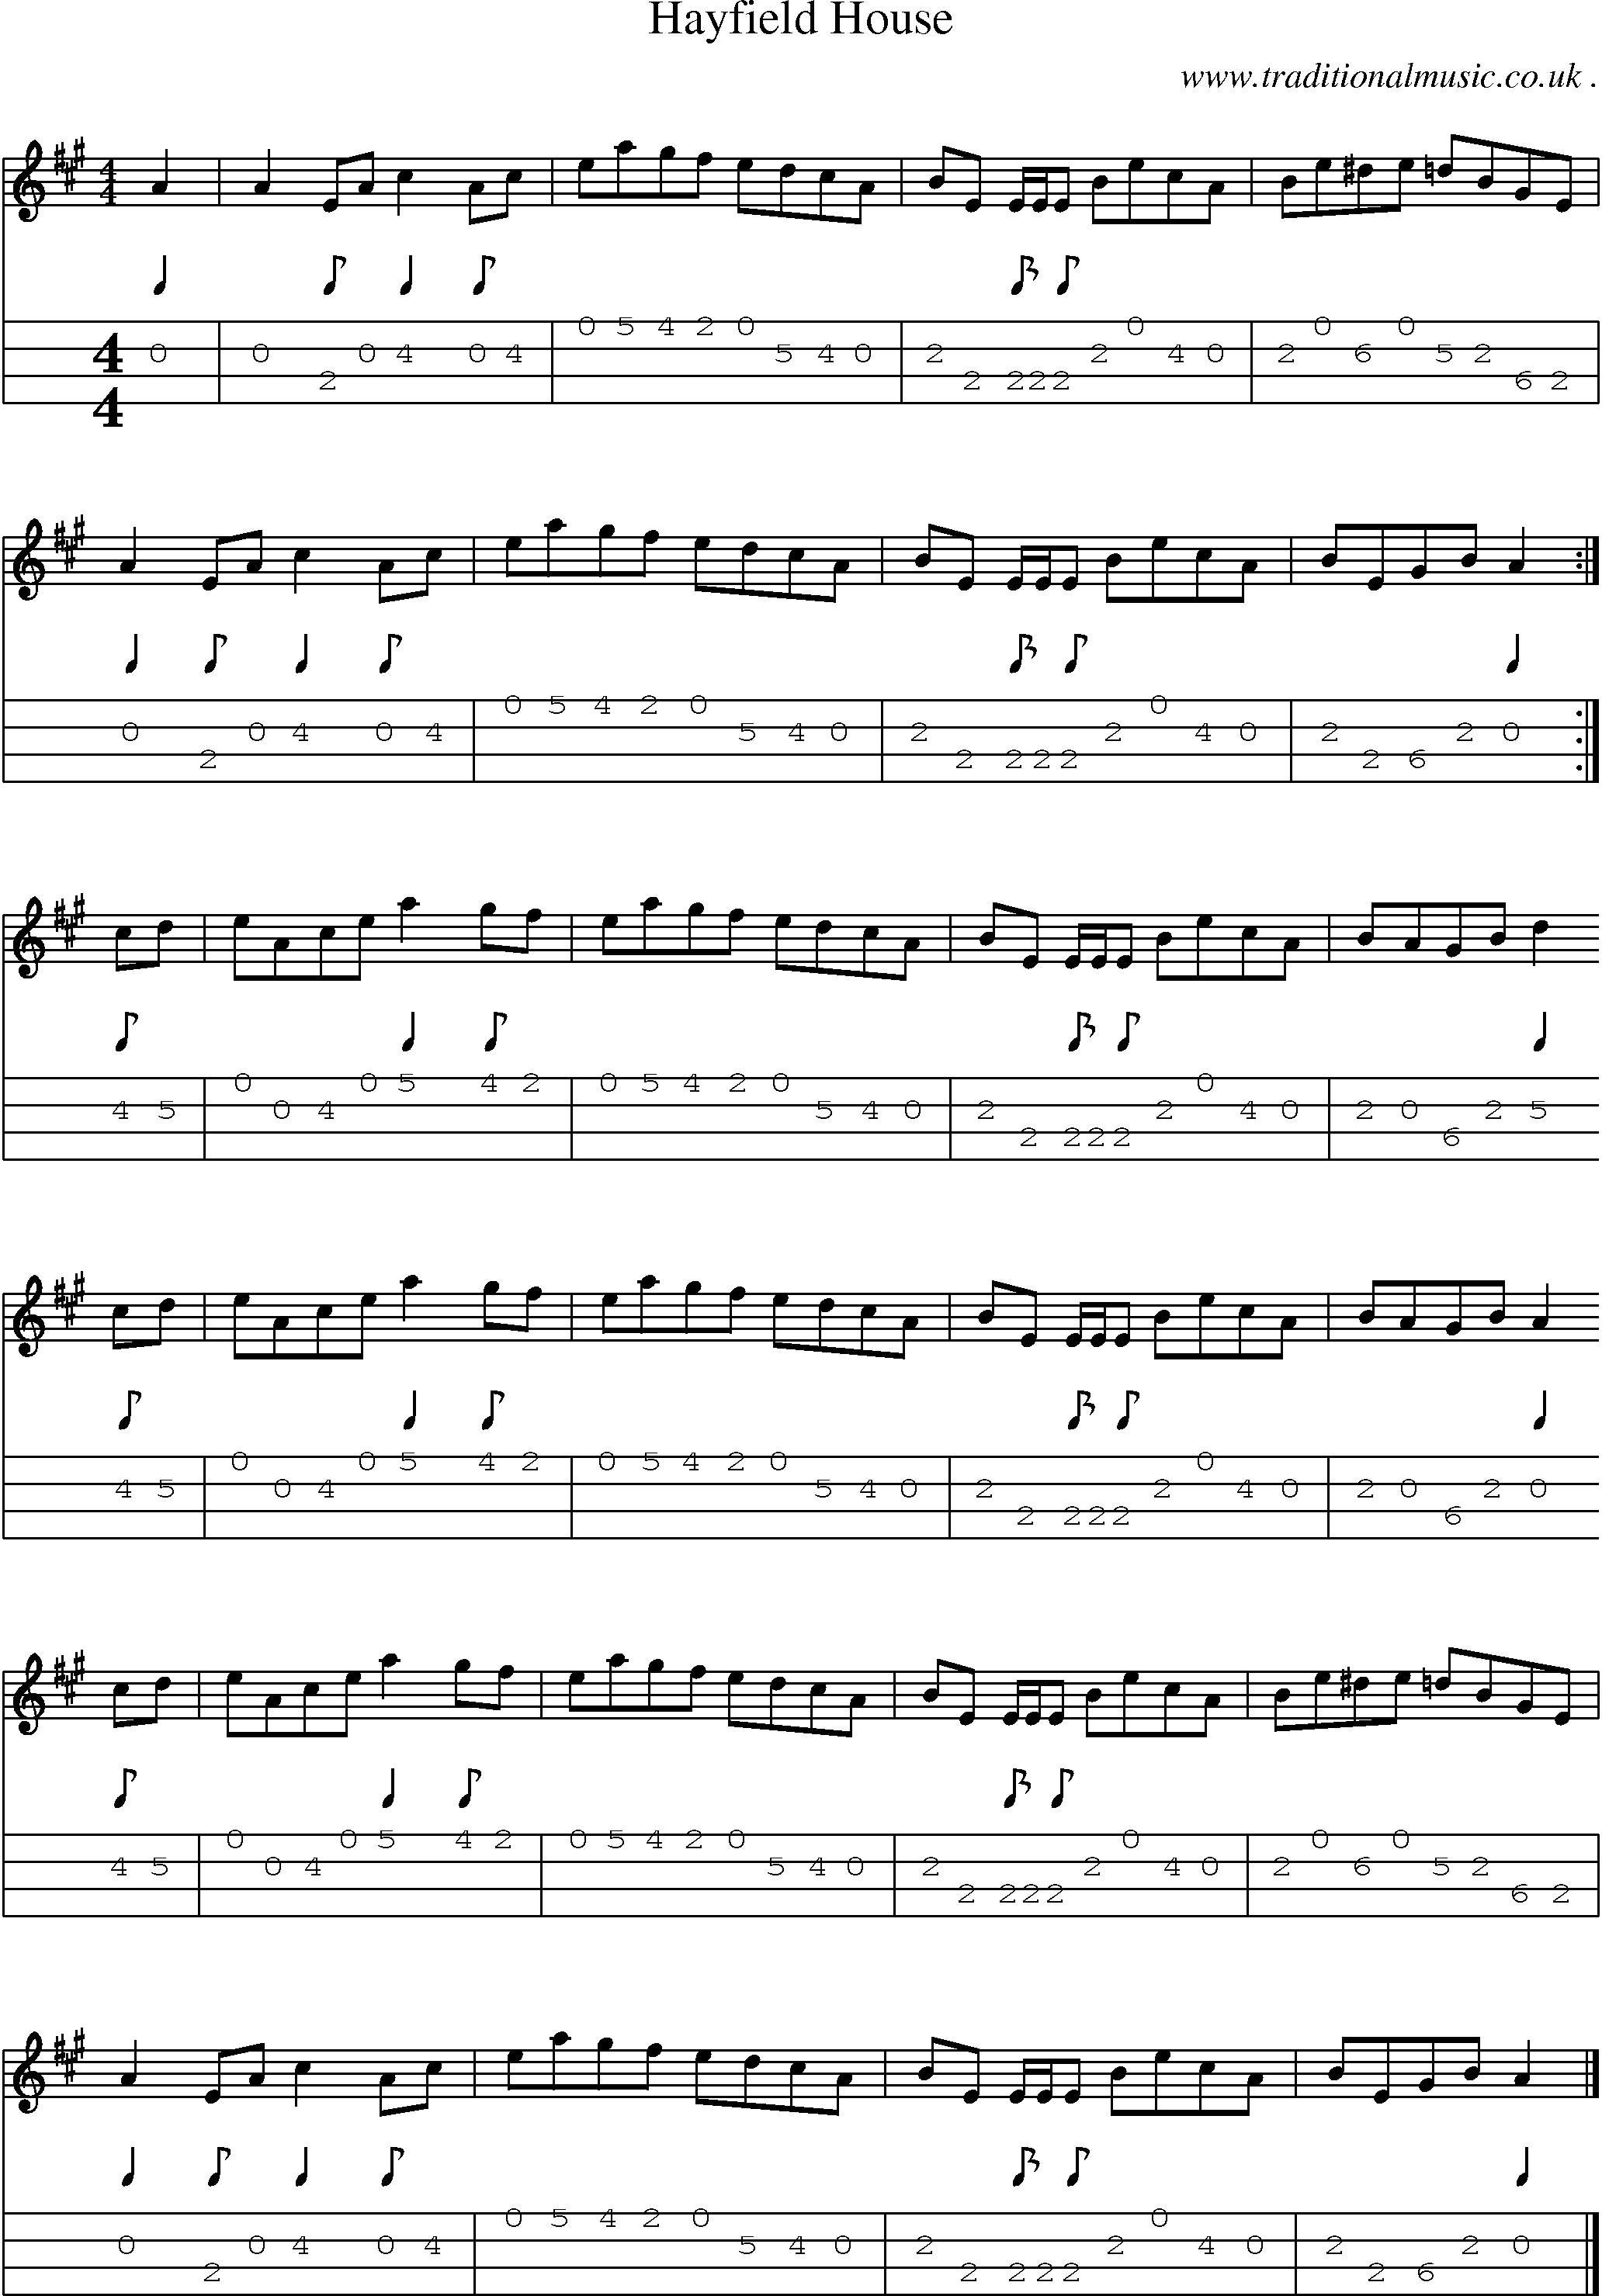 Sheet-music  score, Chords and Mandolin Tabs for Hayfield House